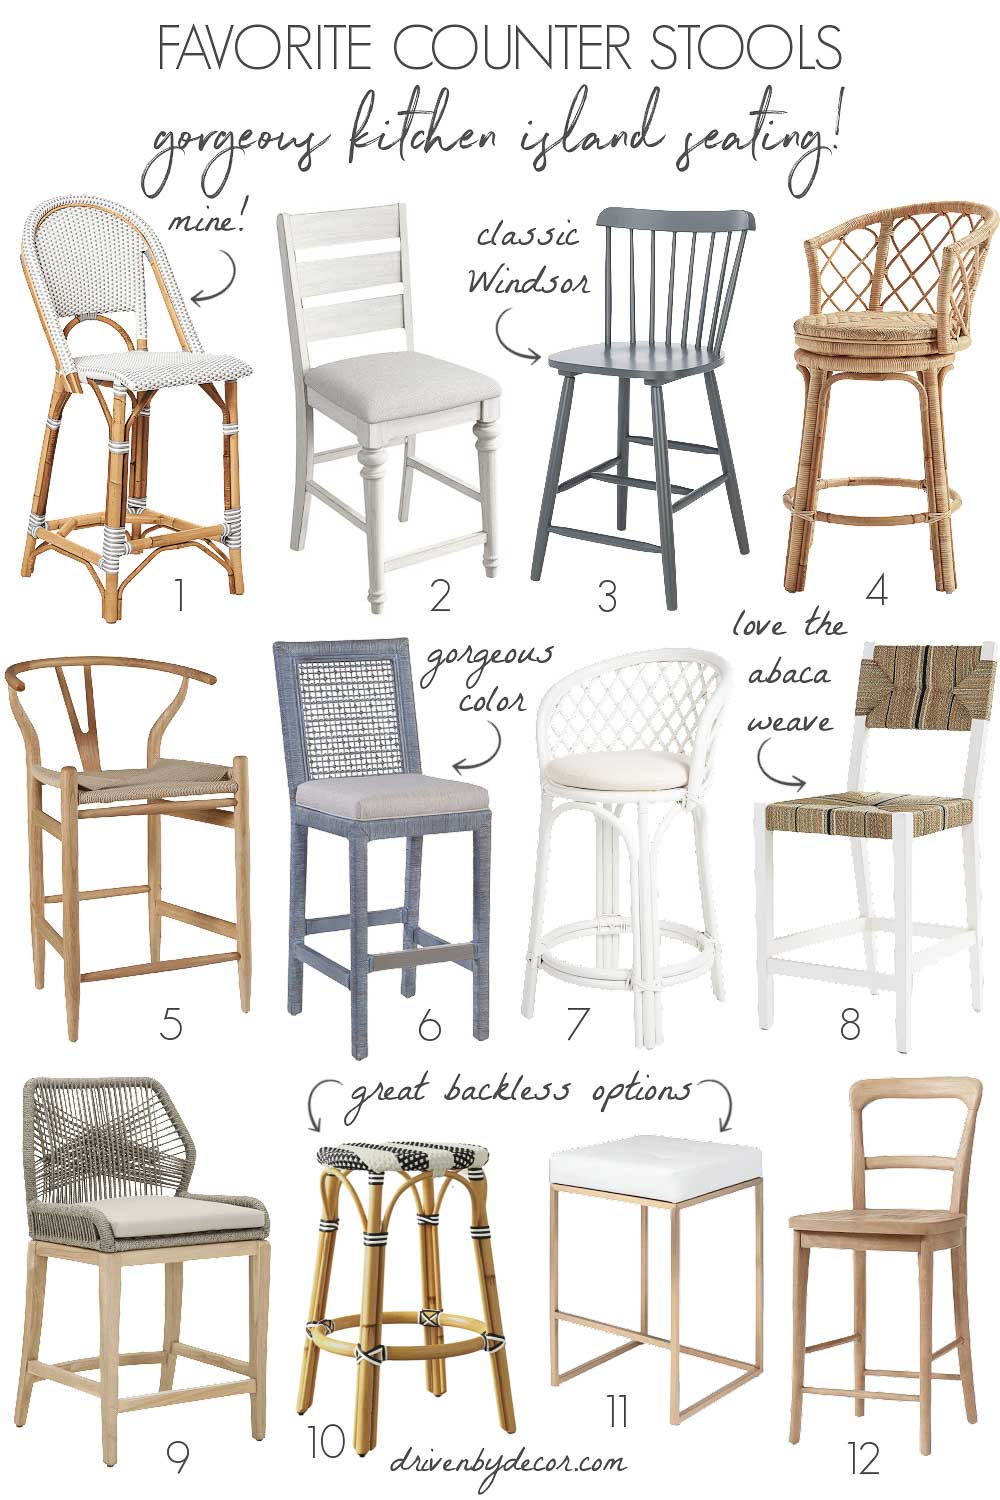 My favorite counter stools that would all make gorgeous additions to your kitchen island!